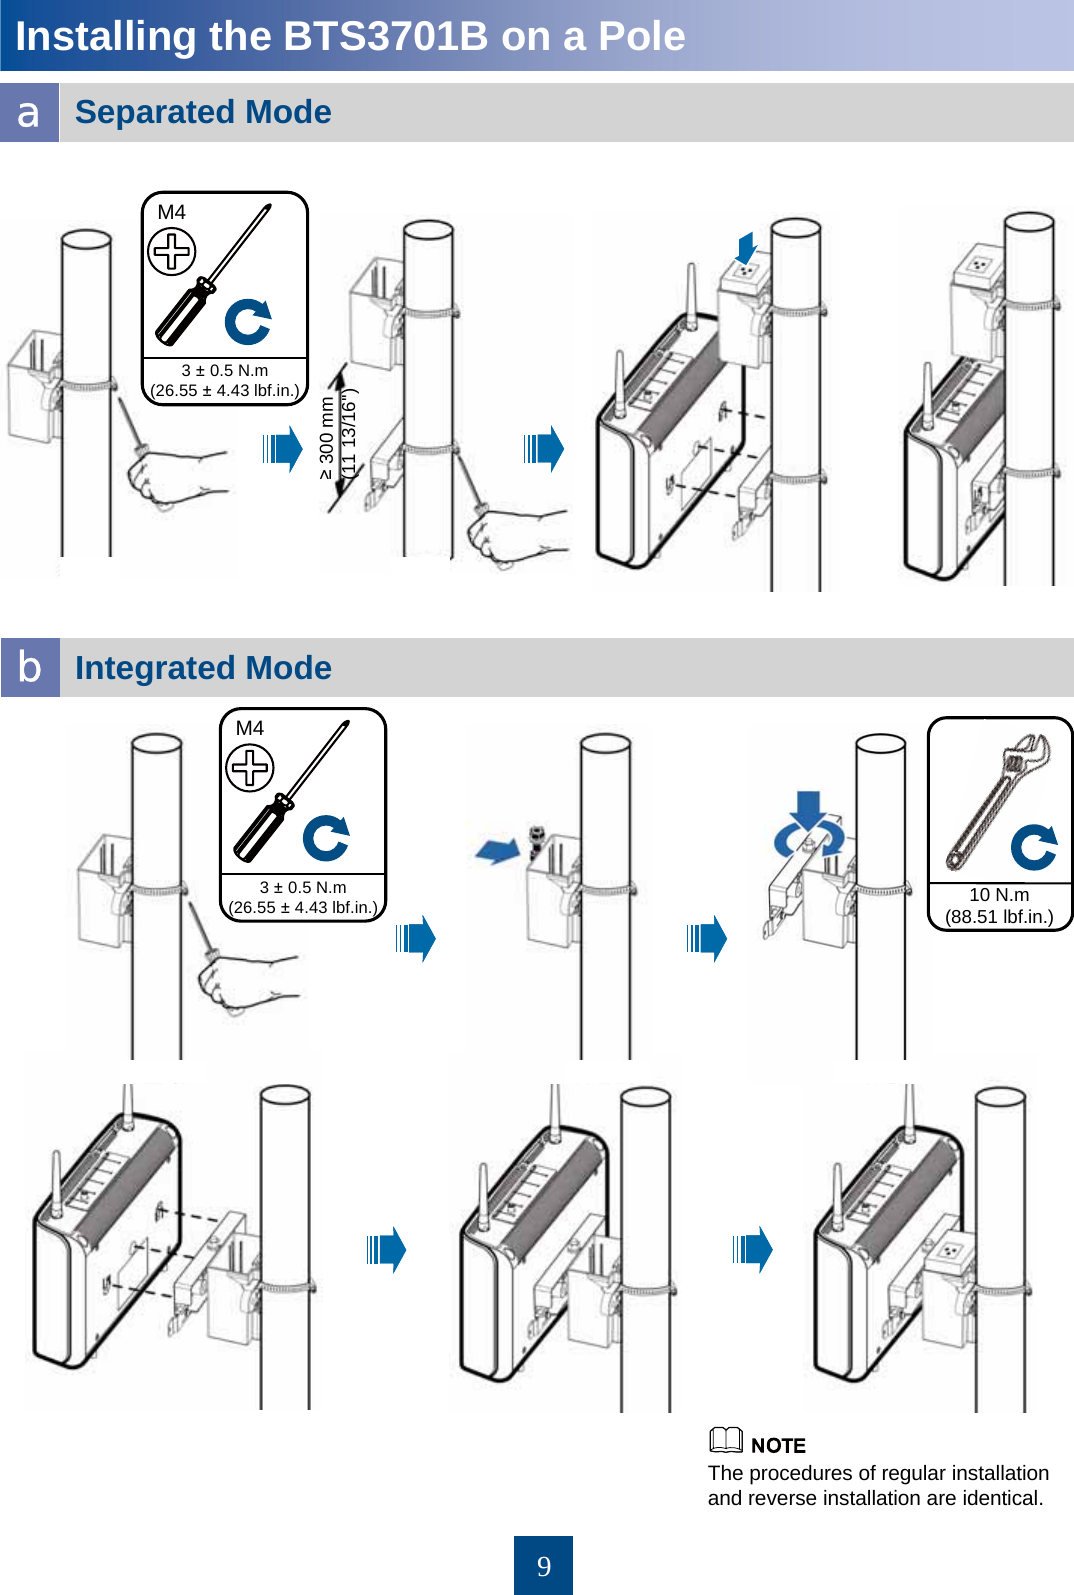 9Installing the BTS3701B on a Pole bIntegrated Mode aSeparated Mode ≥300 mm (11 13/16&apos;&apos;)The procedures of regular installation and reverse installation are identical. 3 ±0.5 N.m (26.55 ±4.43 lbf.in.)M43 ±0.5 N.m (26.55 ±4.43 lbf.in.)M410 N.m (88.51 lbf.in.)